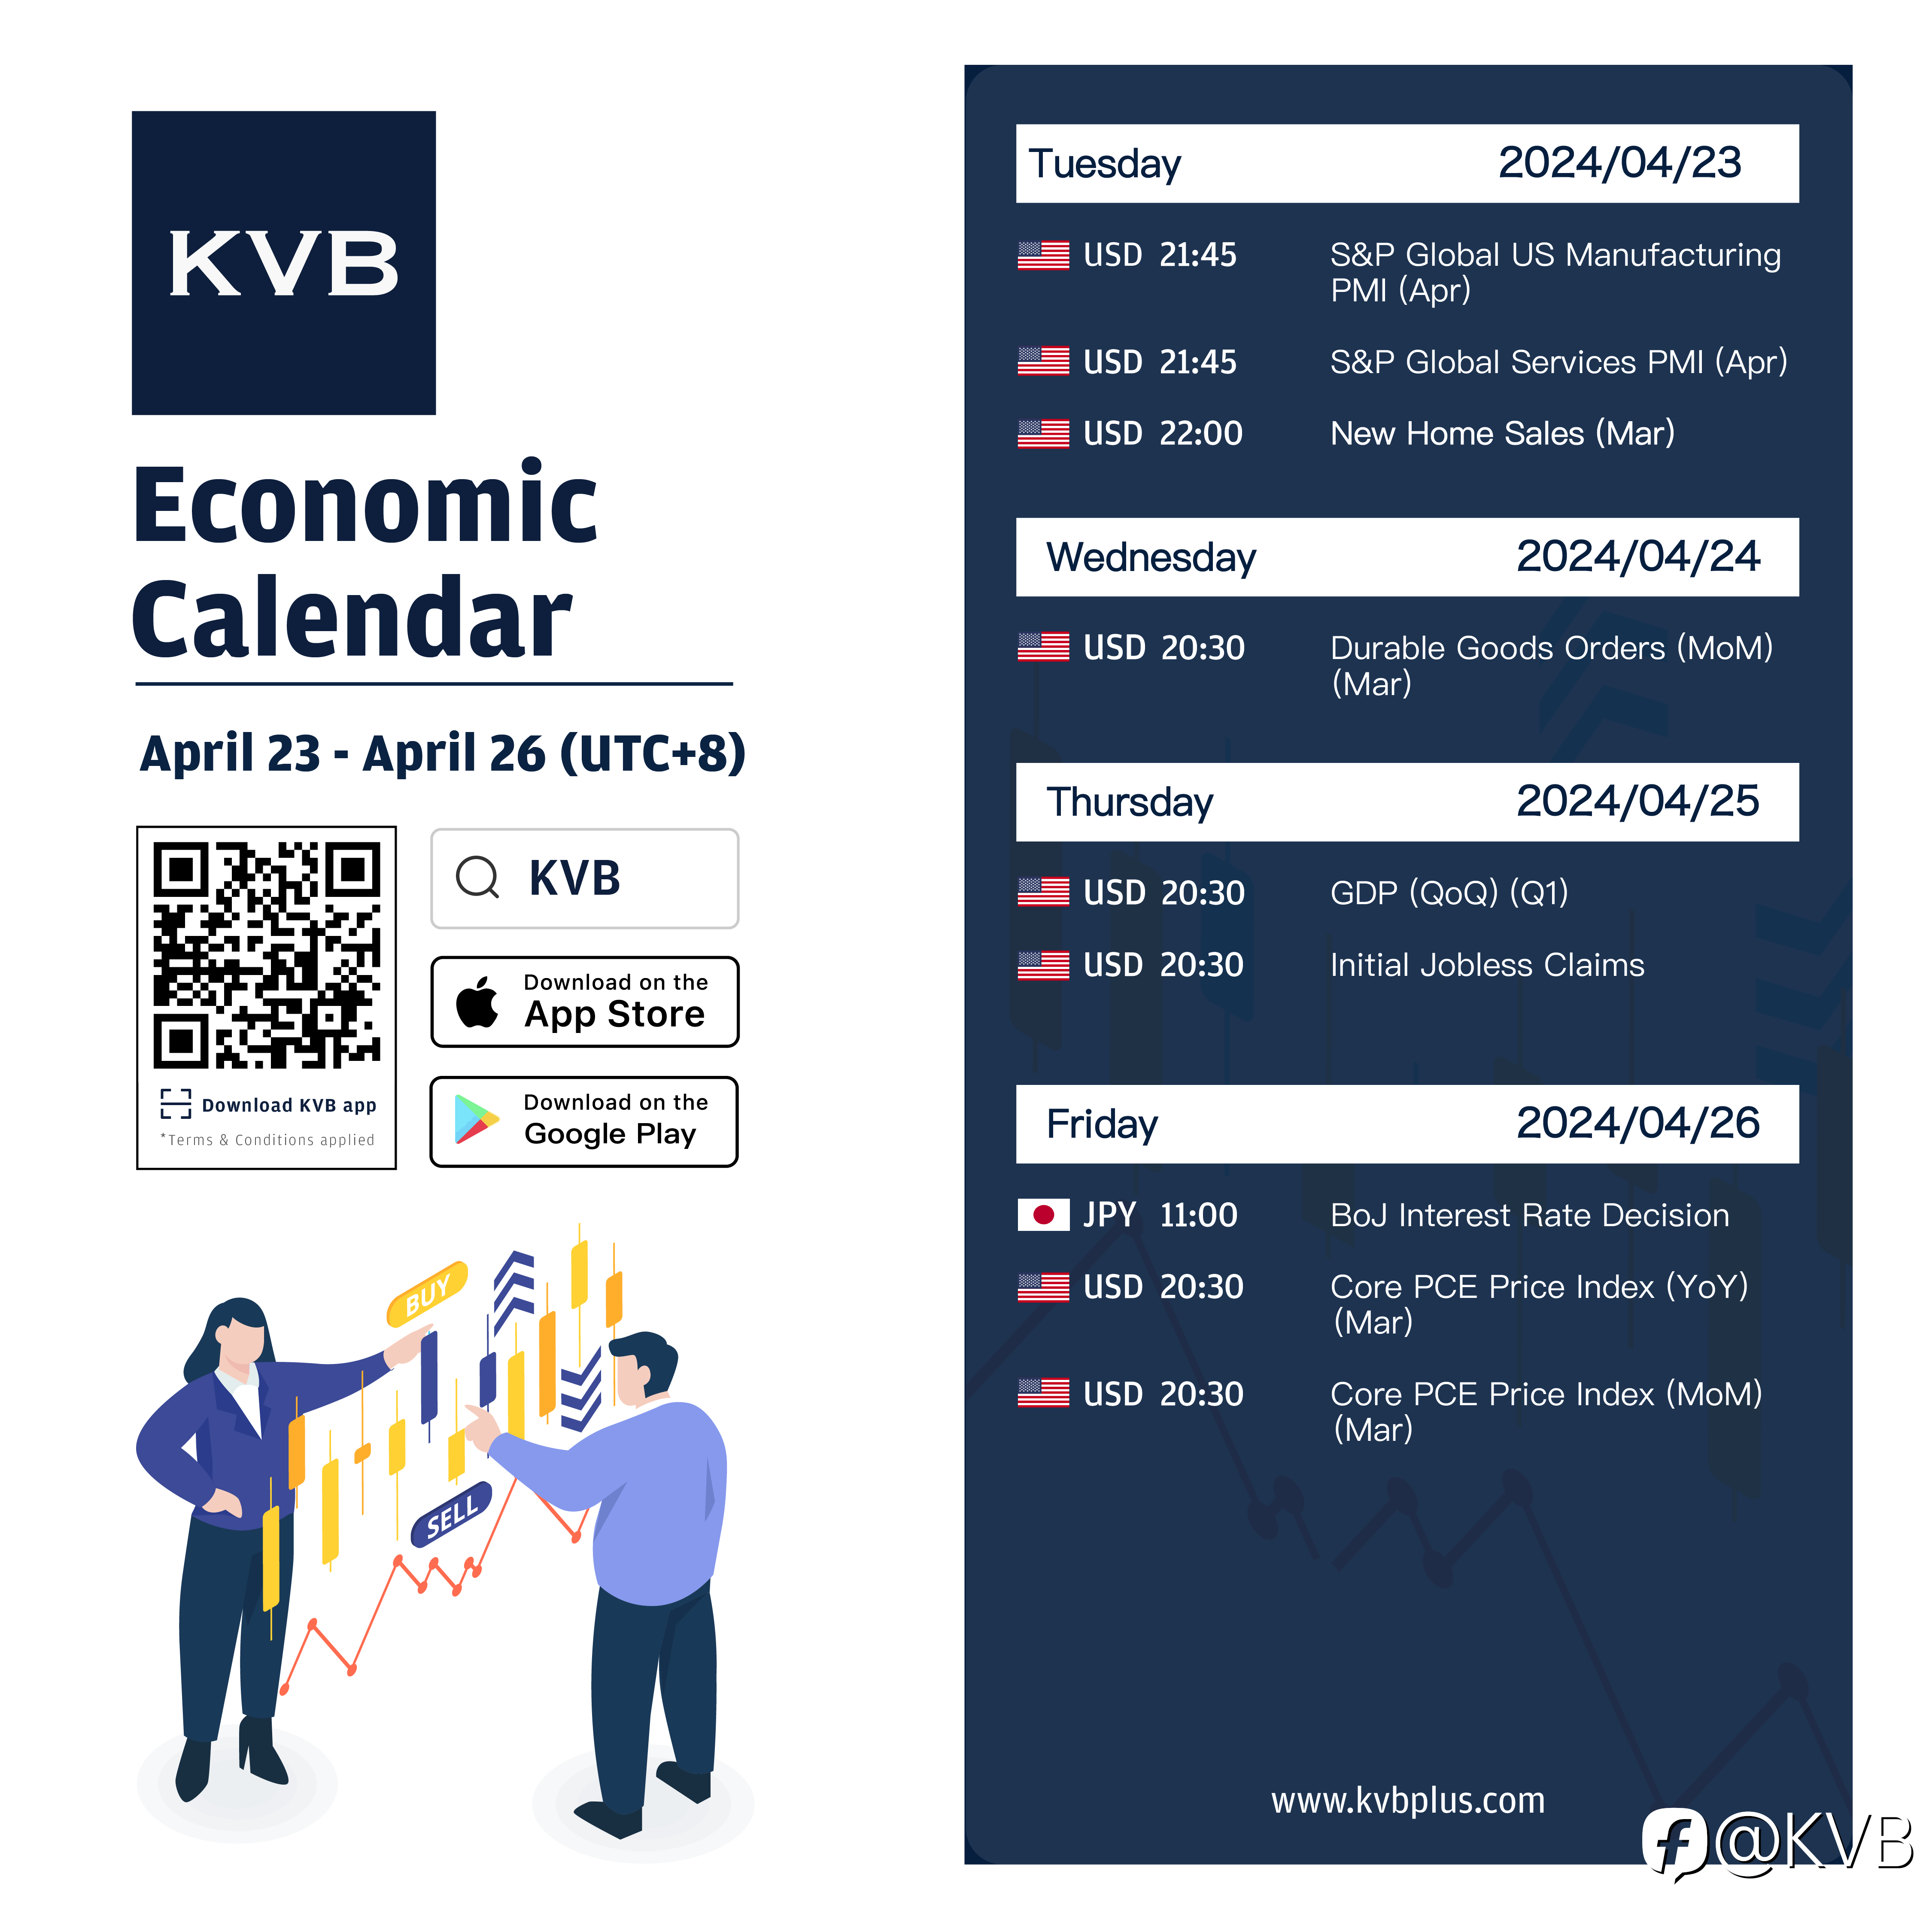 What economic events should you keep an eye on this week? 🤔